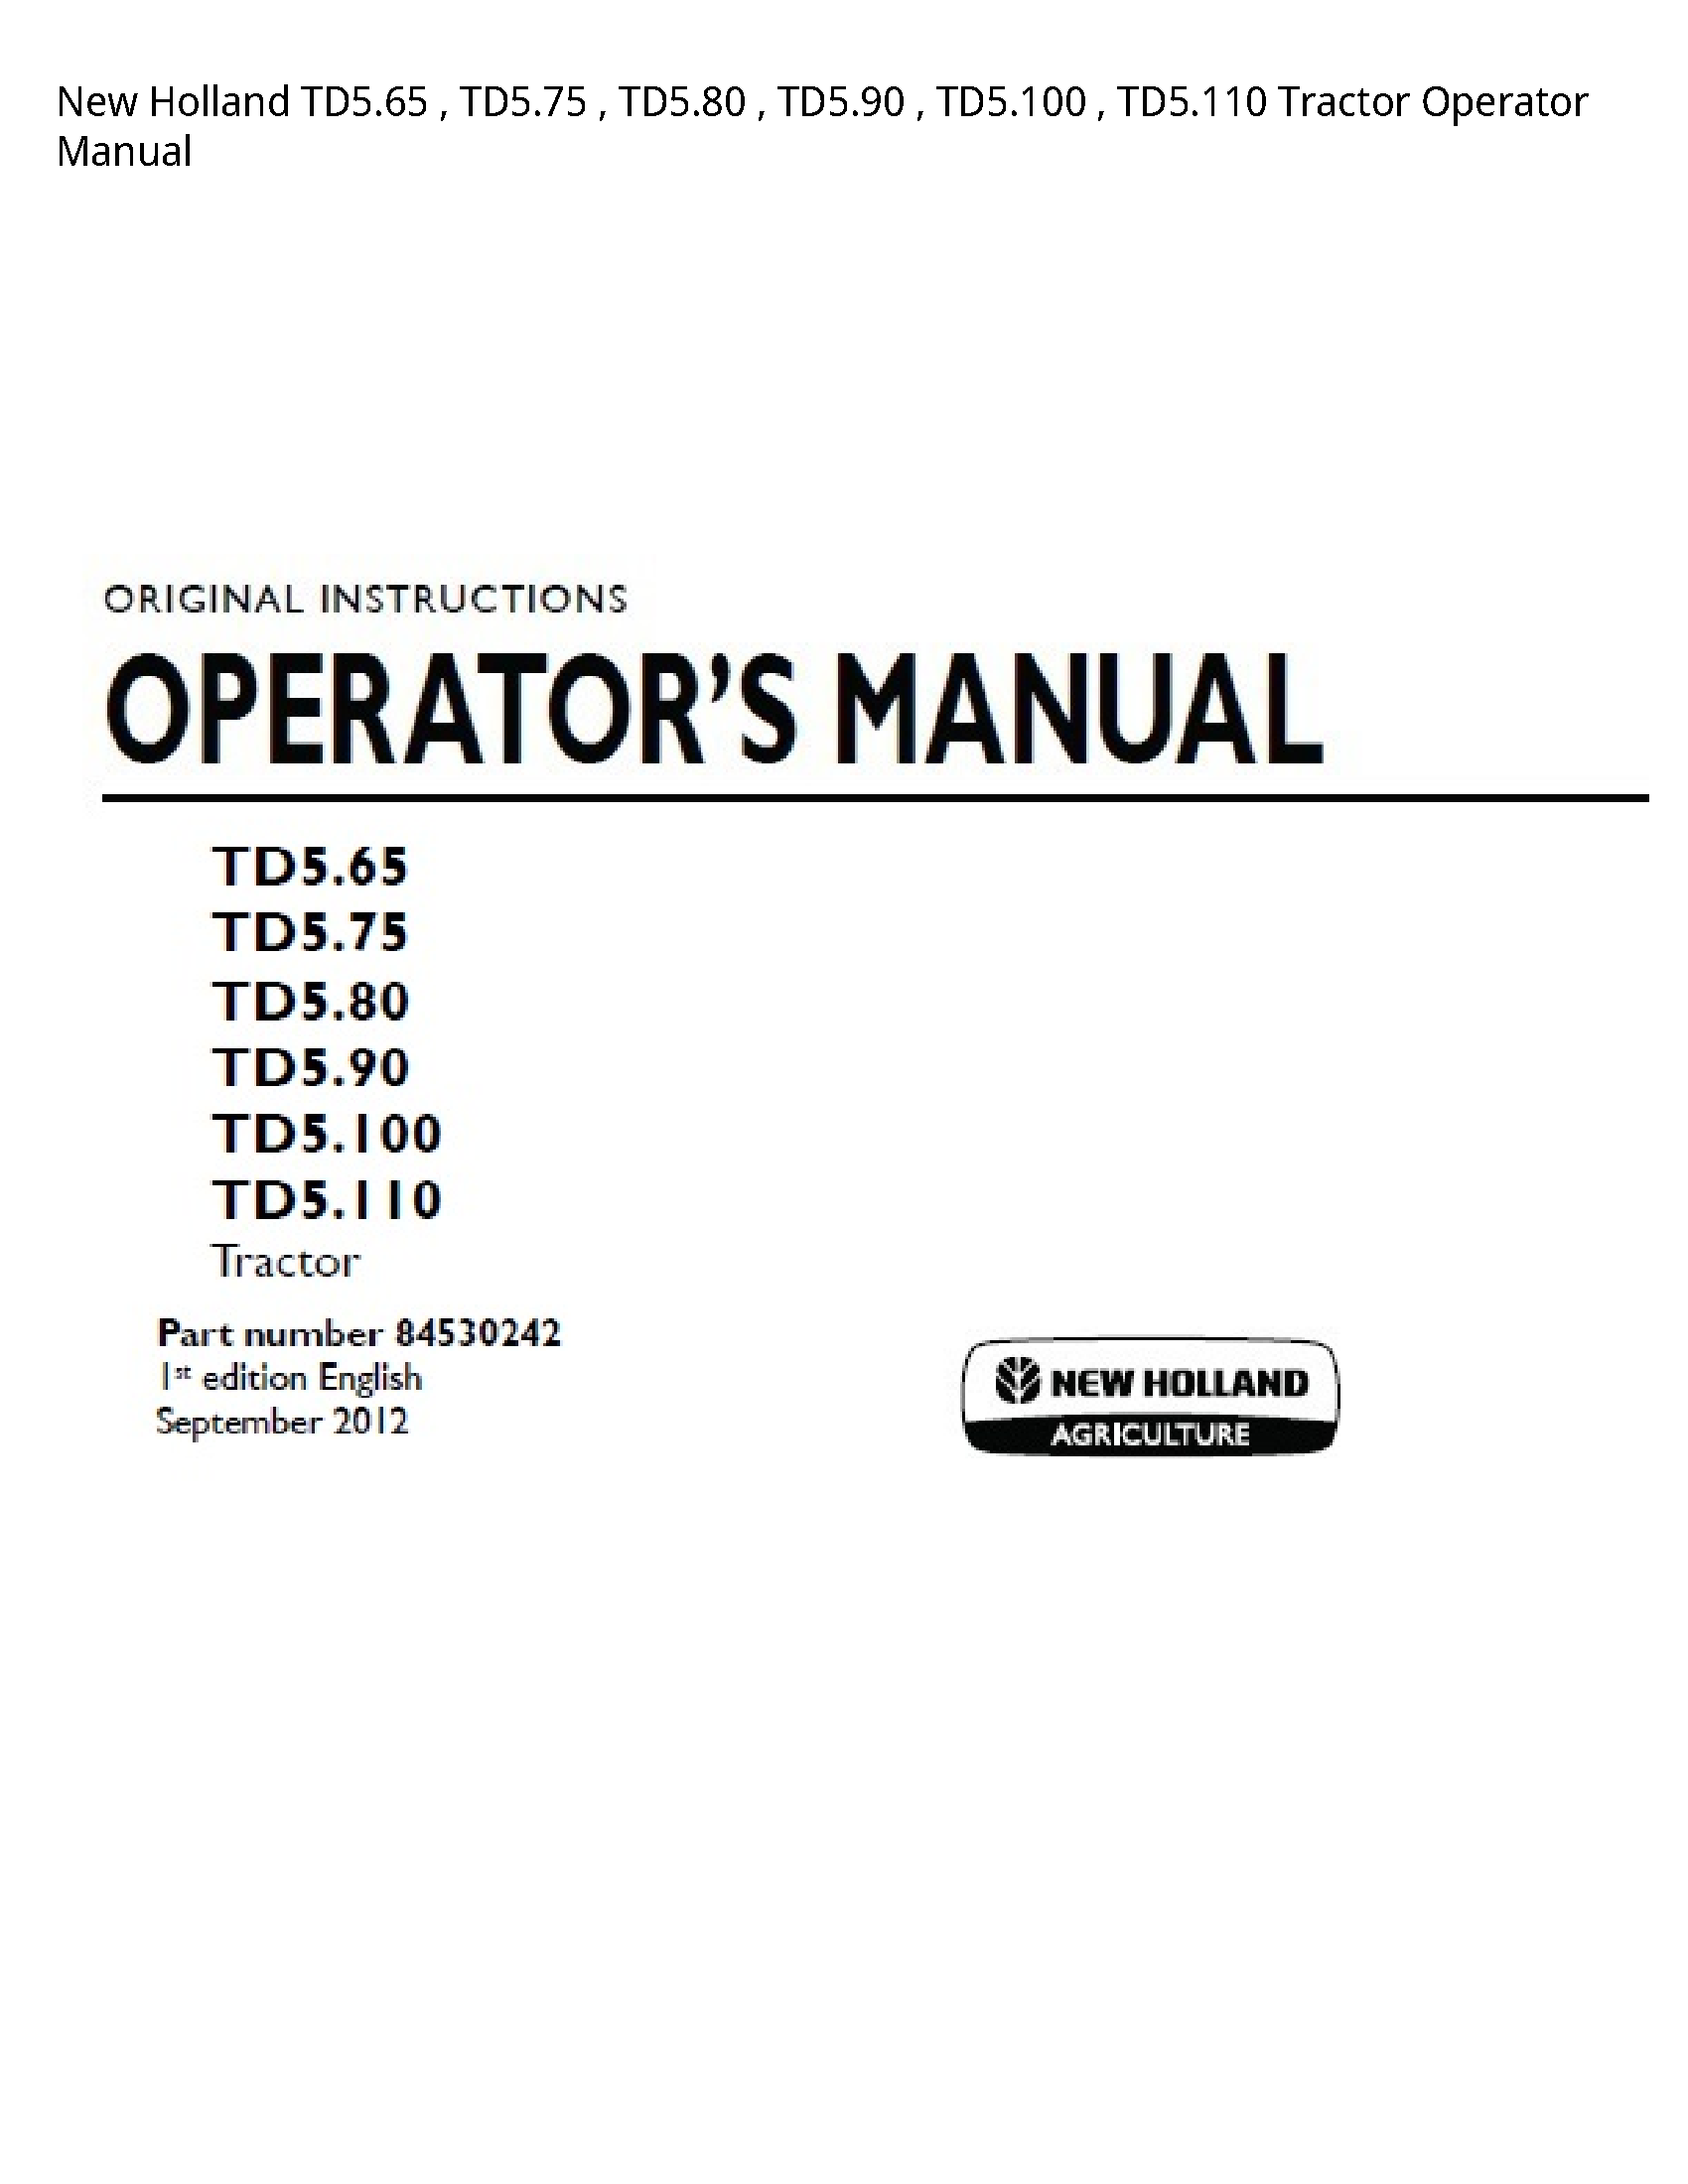 New Holland TD5.65 Tractor Operator manual